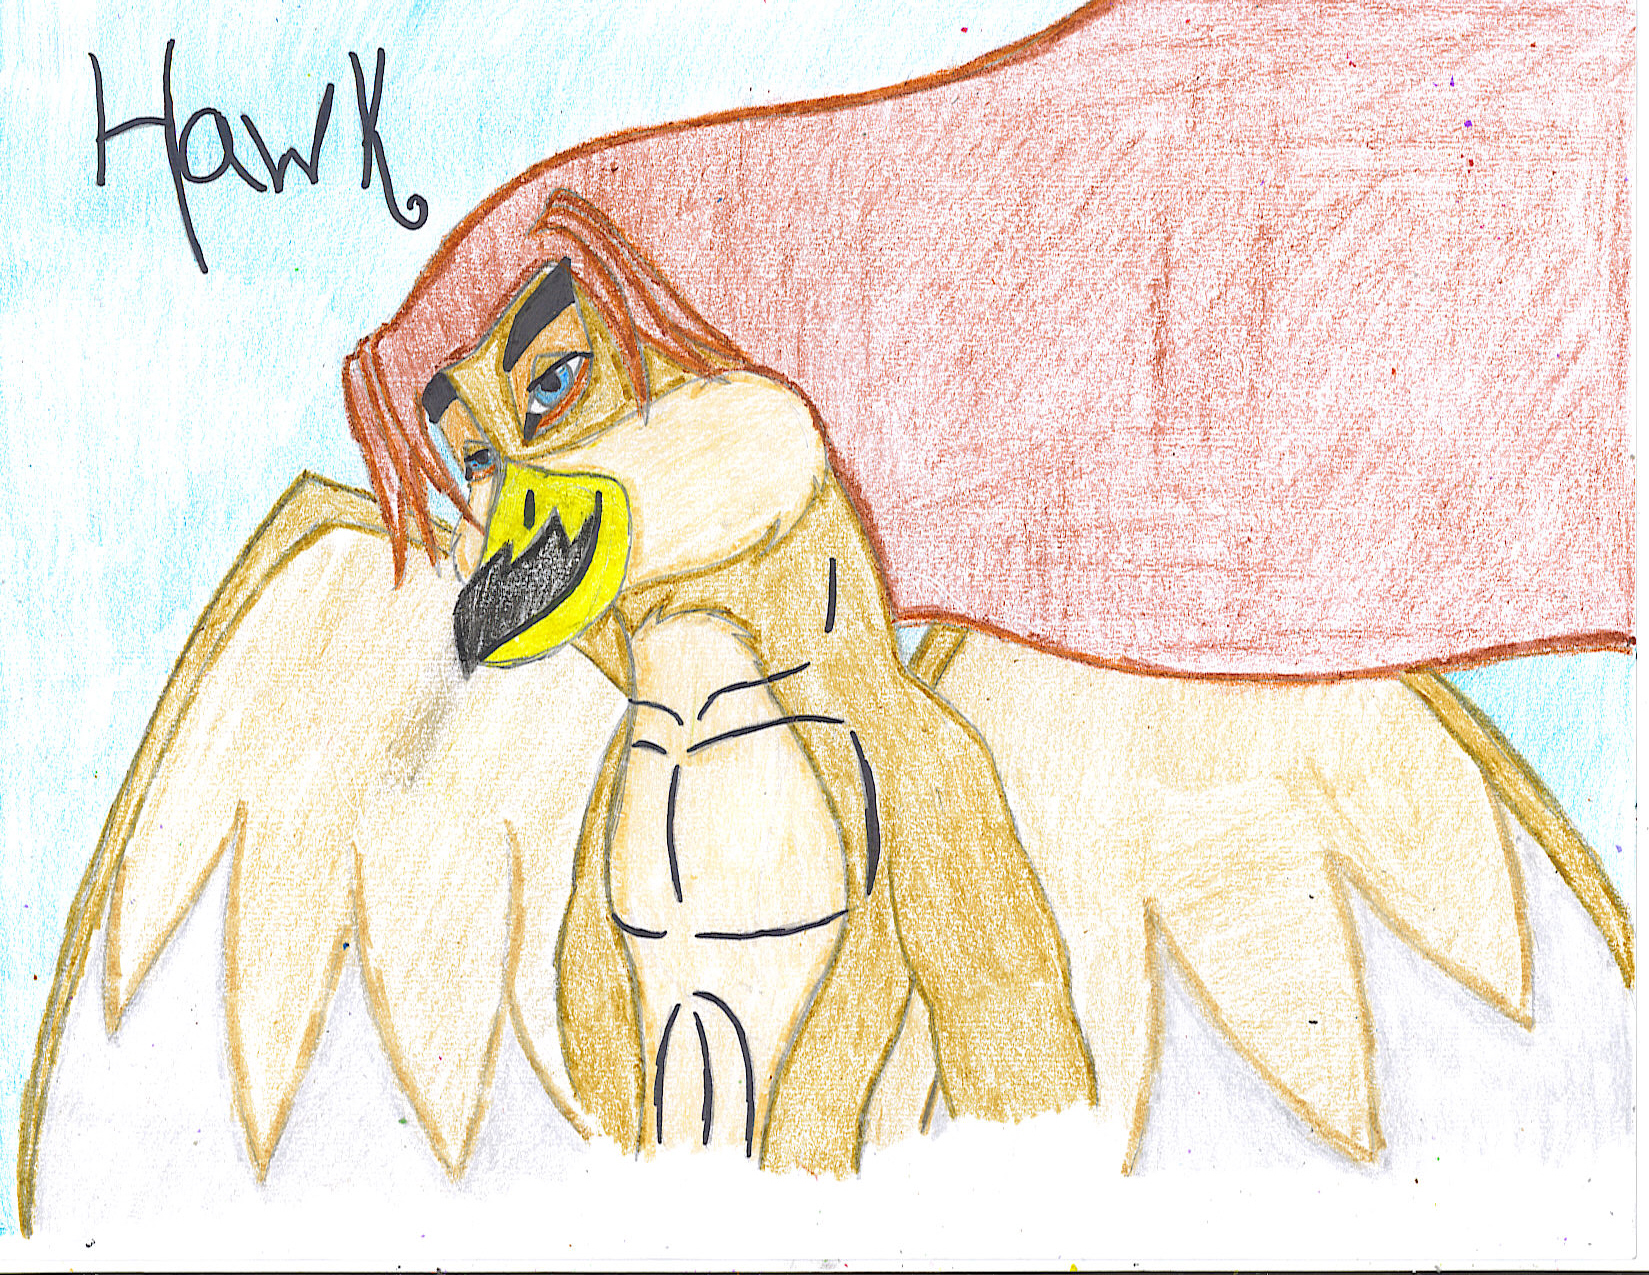 Hawk- Contest entry by Yami_And_The_Fallen_Angel